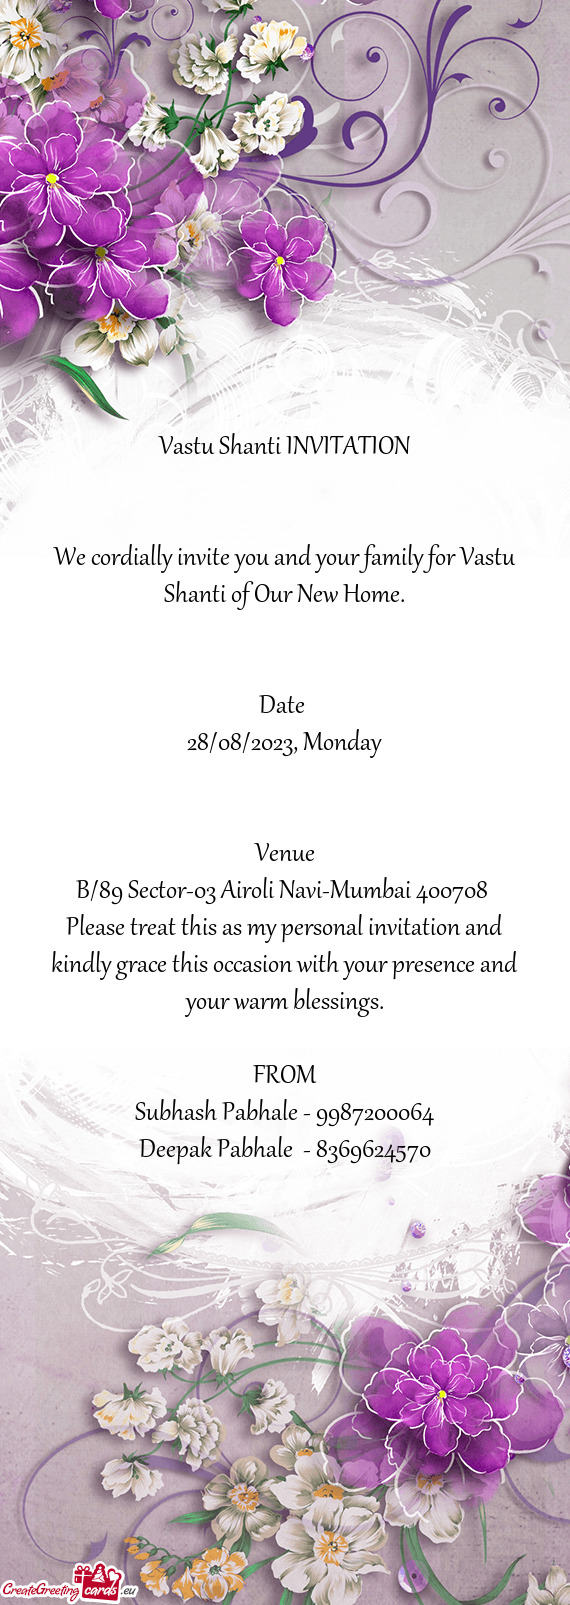 We cordially invite you and your family for Vastu Shanti of Our New Home